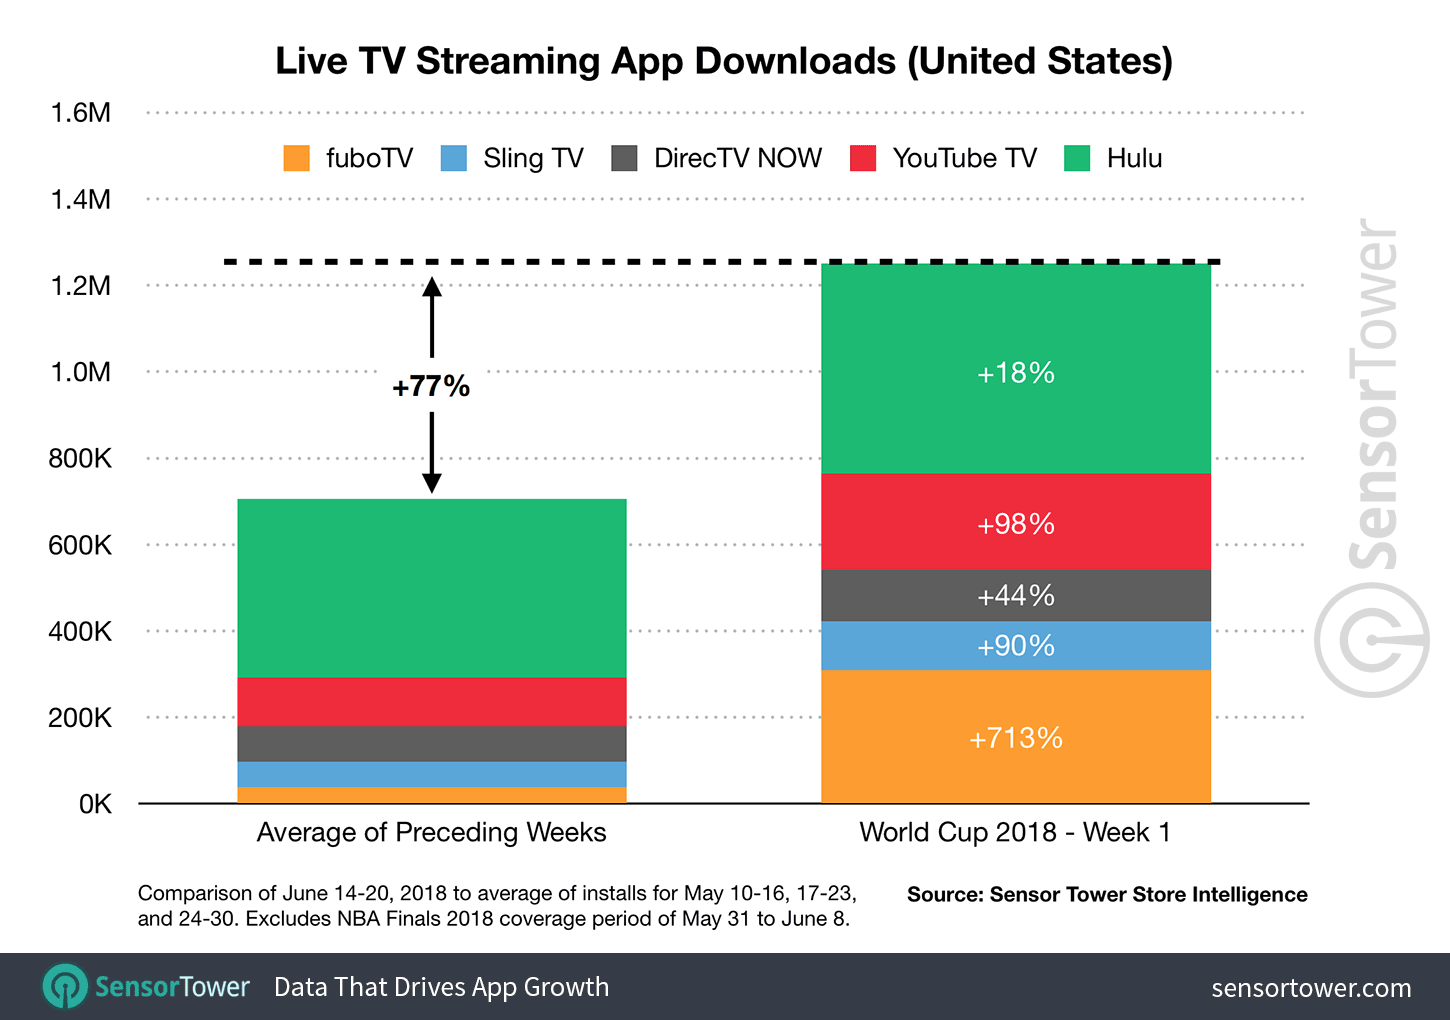 Chart showing increase in downloads of the top U.S. mobile television streaming apps during the first week of the World Cup 2018 compared to the previous period